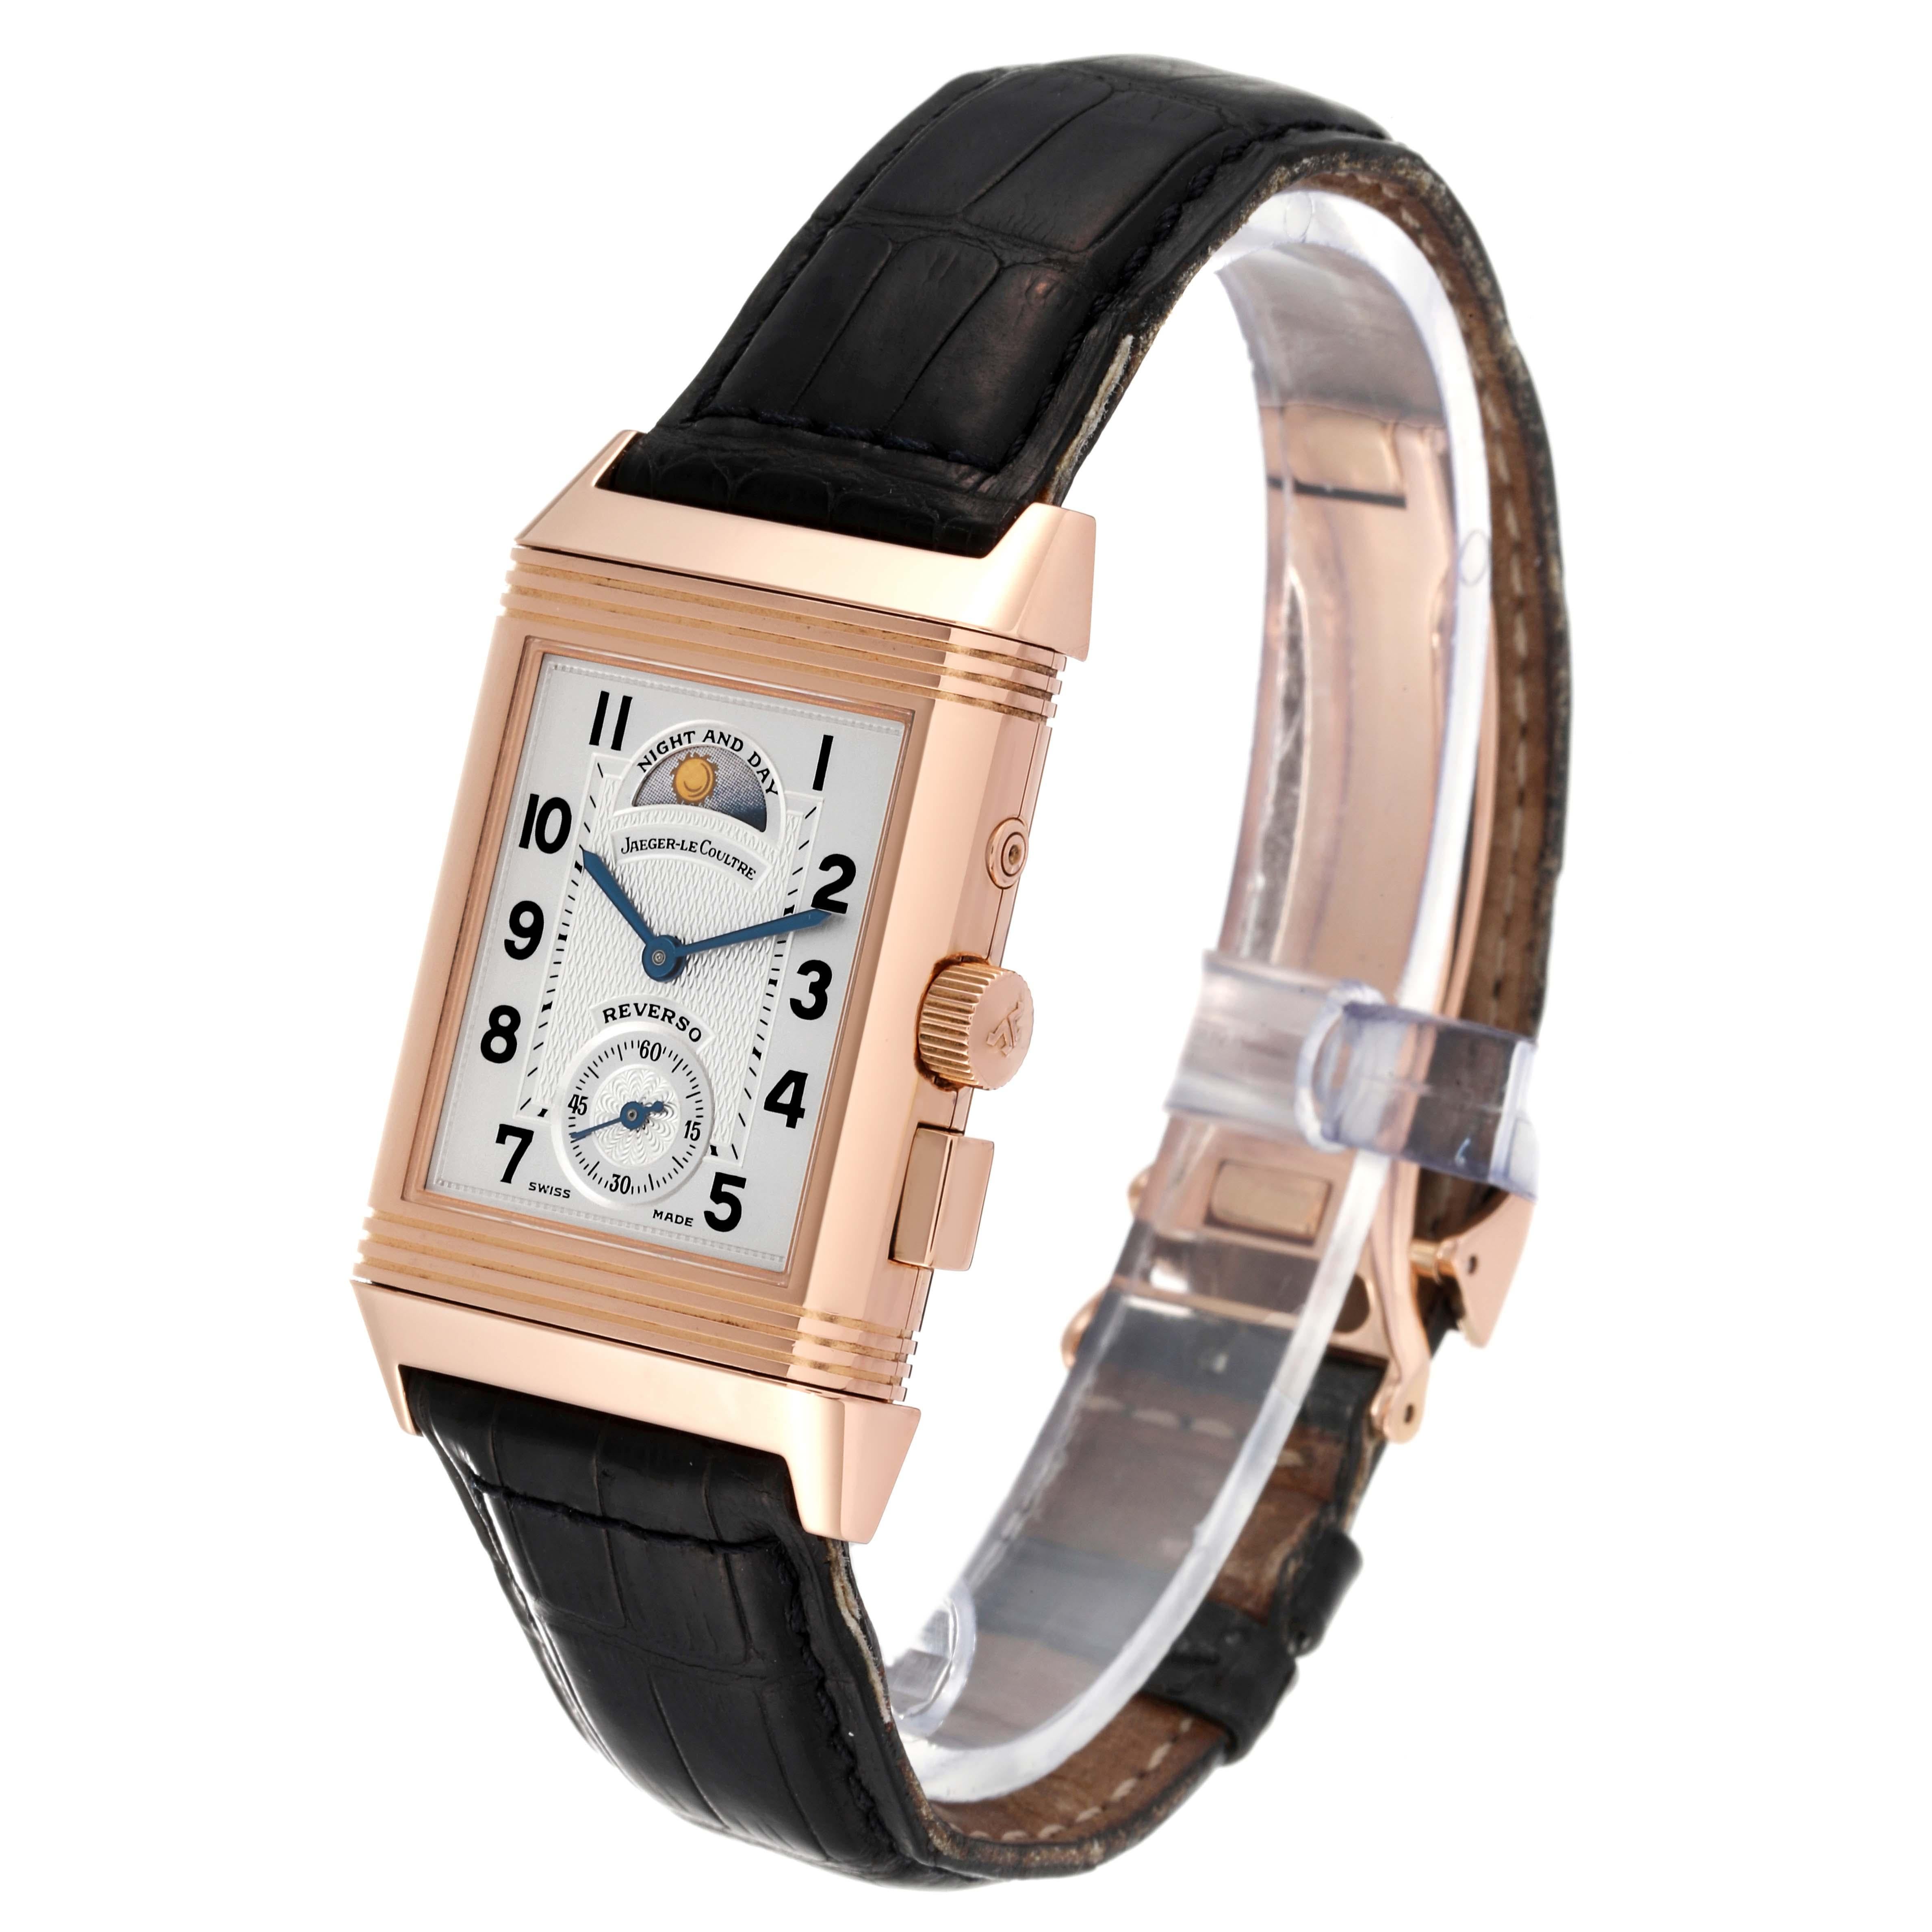 Jaeger LeCoultre Reverso Geographique LE Rose Gold Watch 270.2.582B Box Papers 2